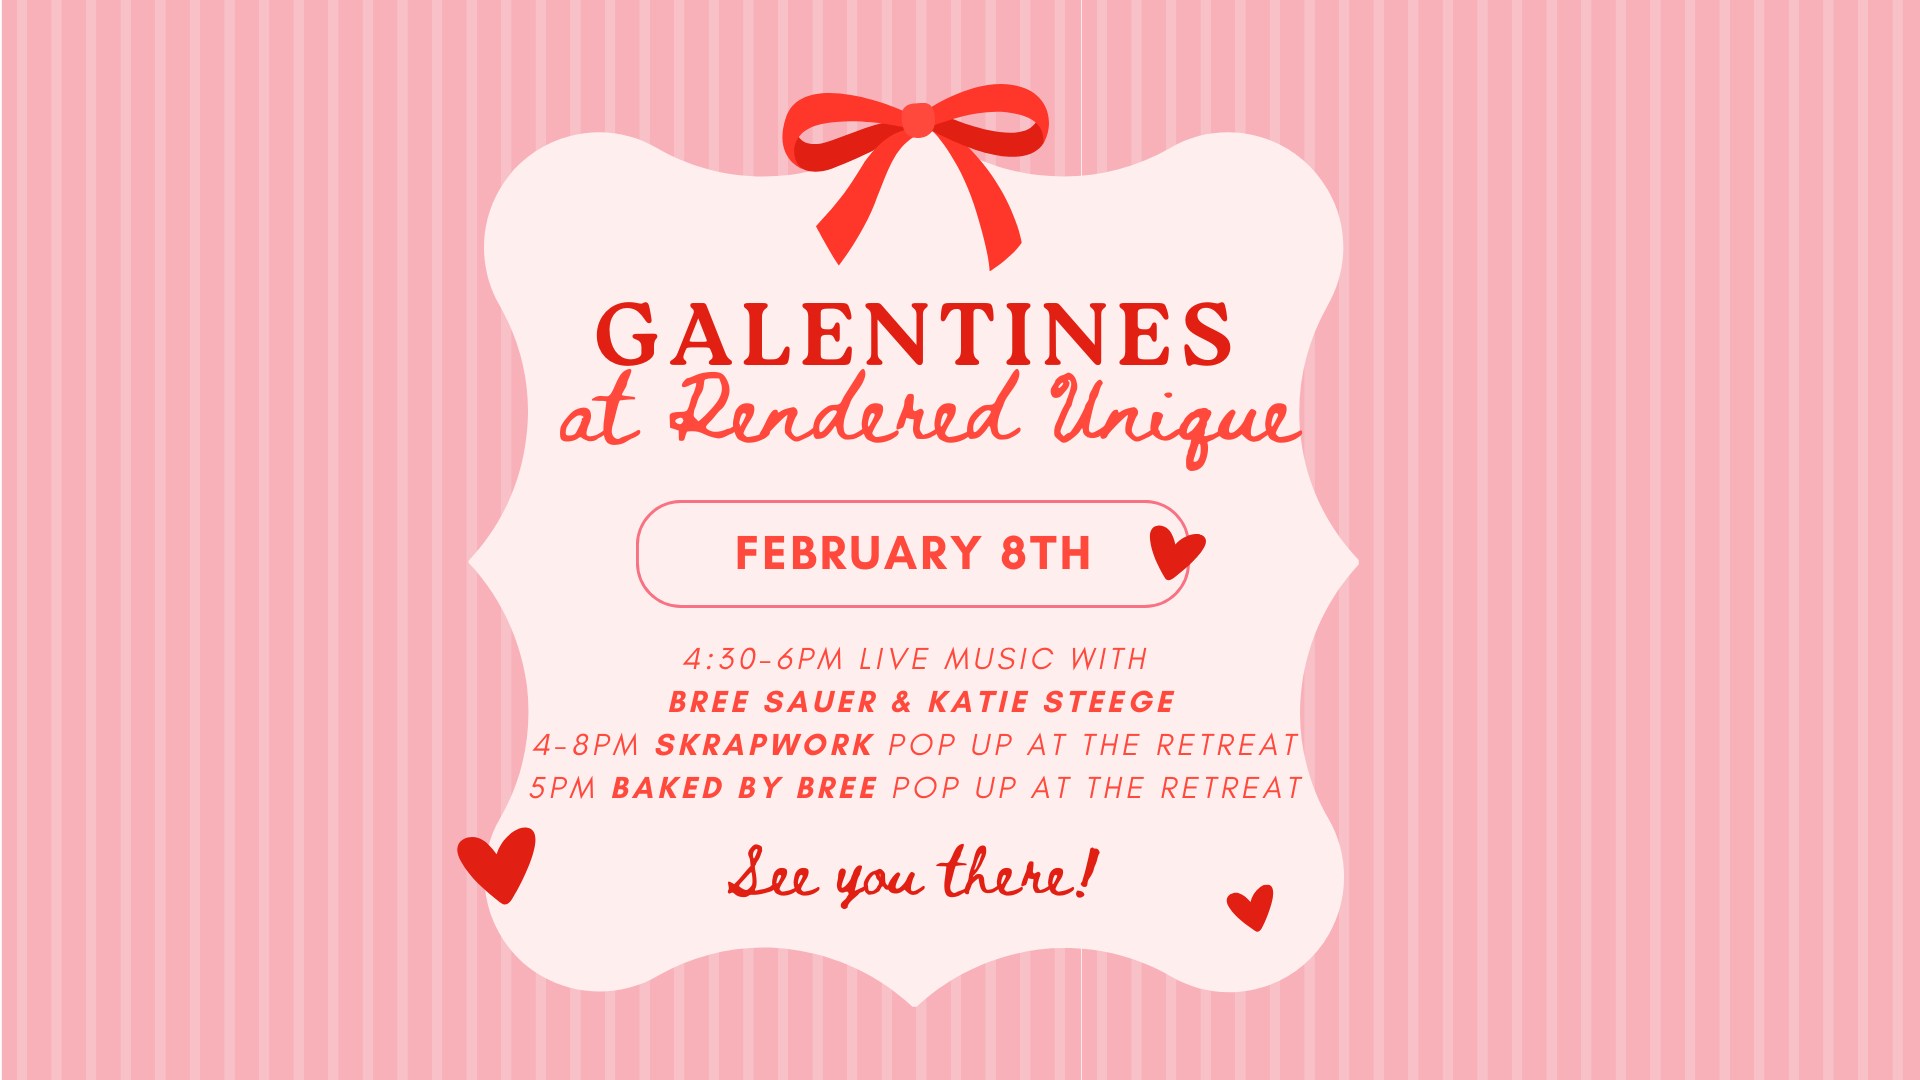 Galentines at Rendered Unique thumbnail